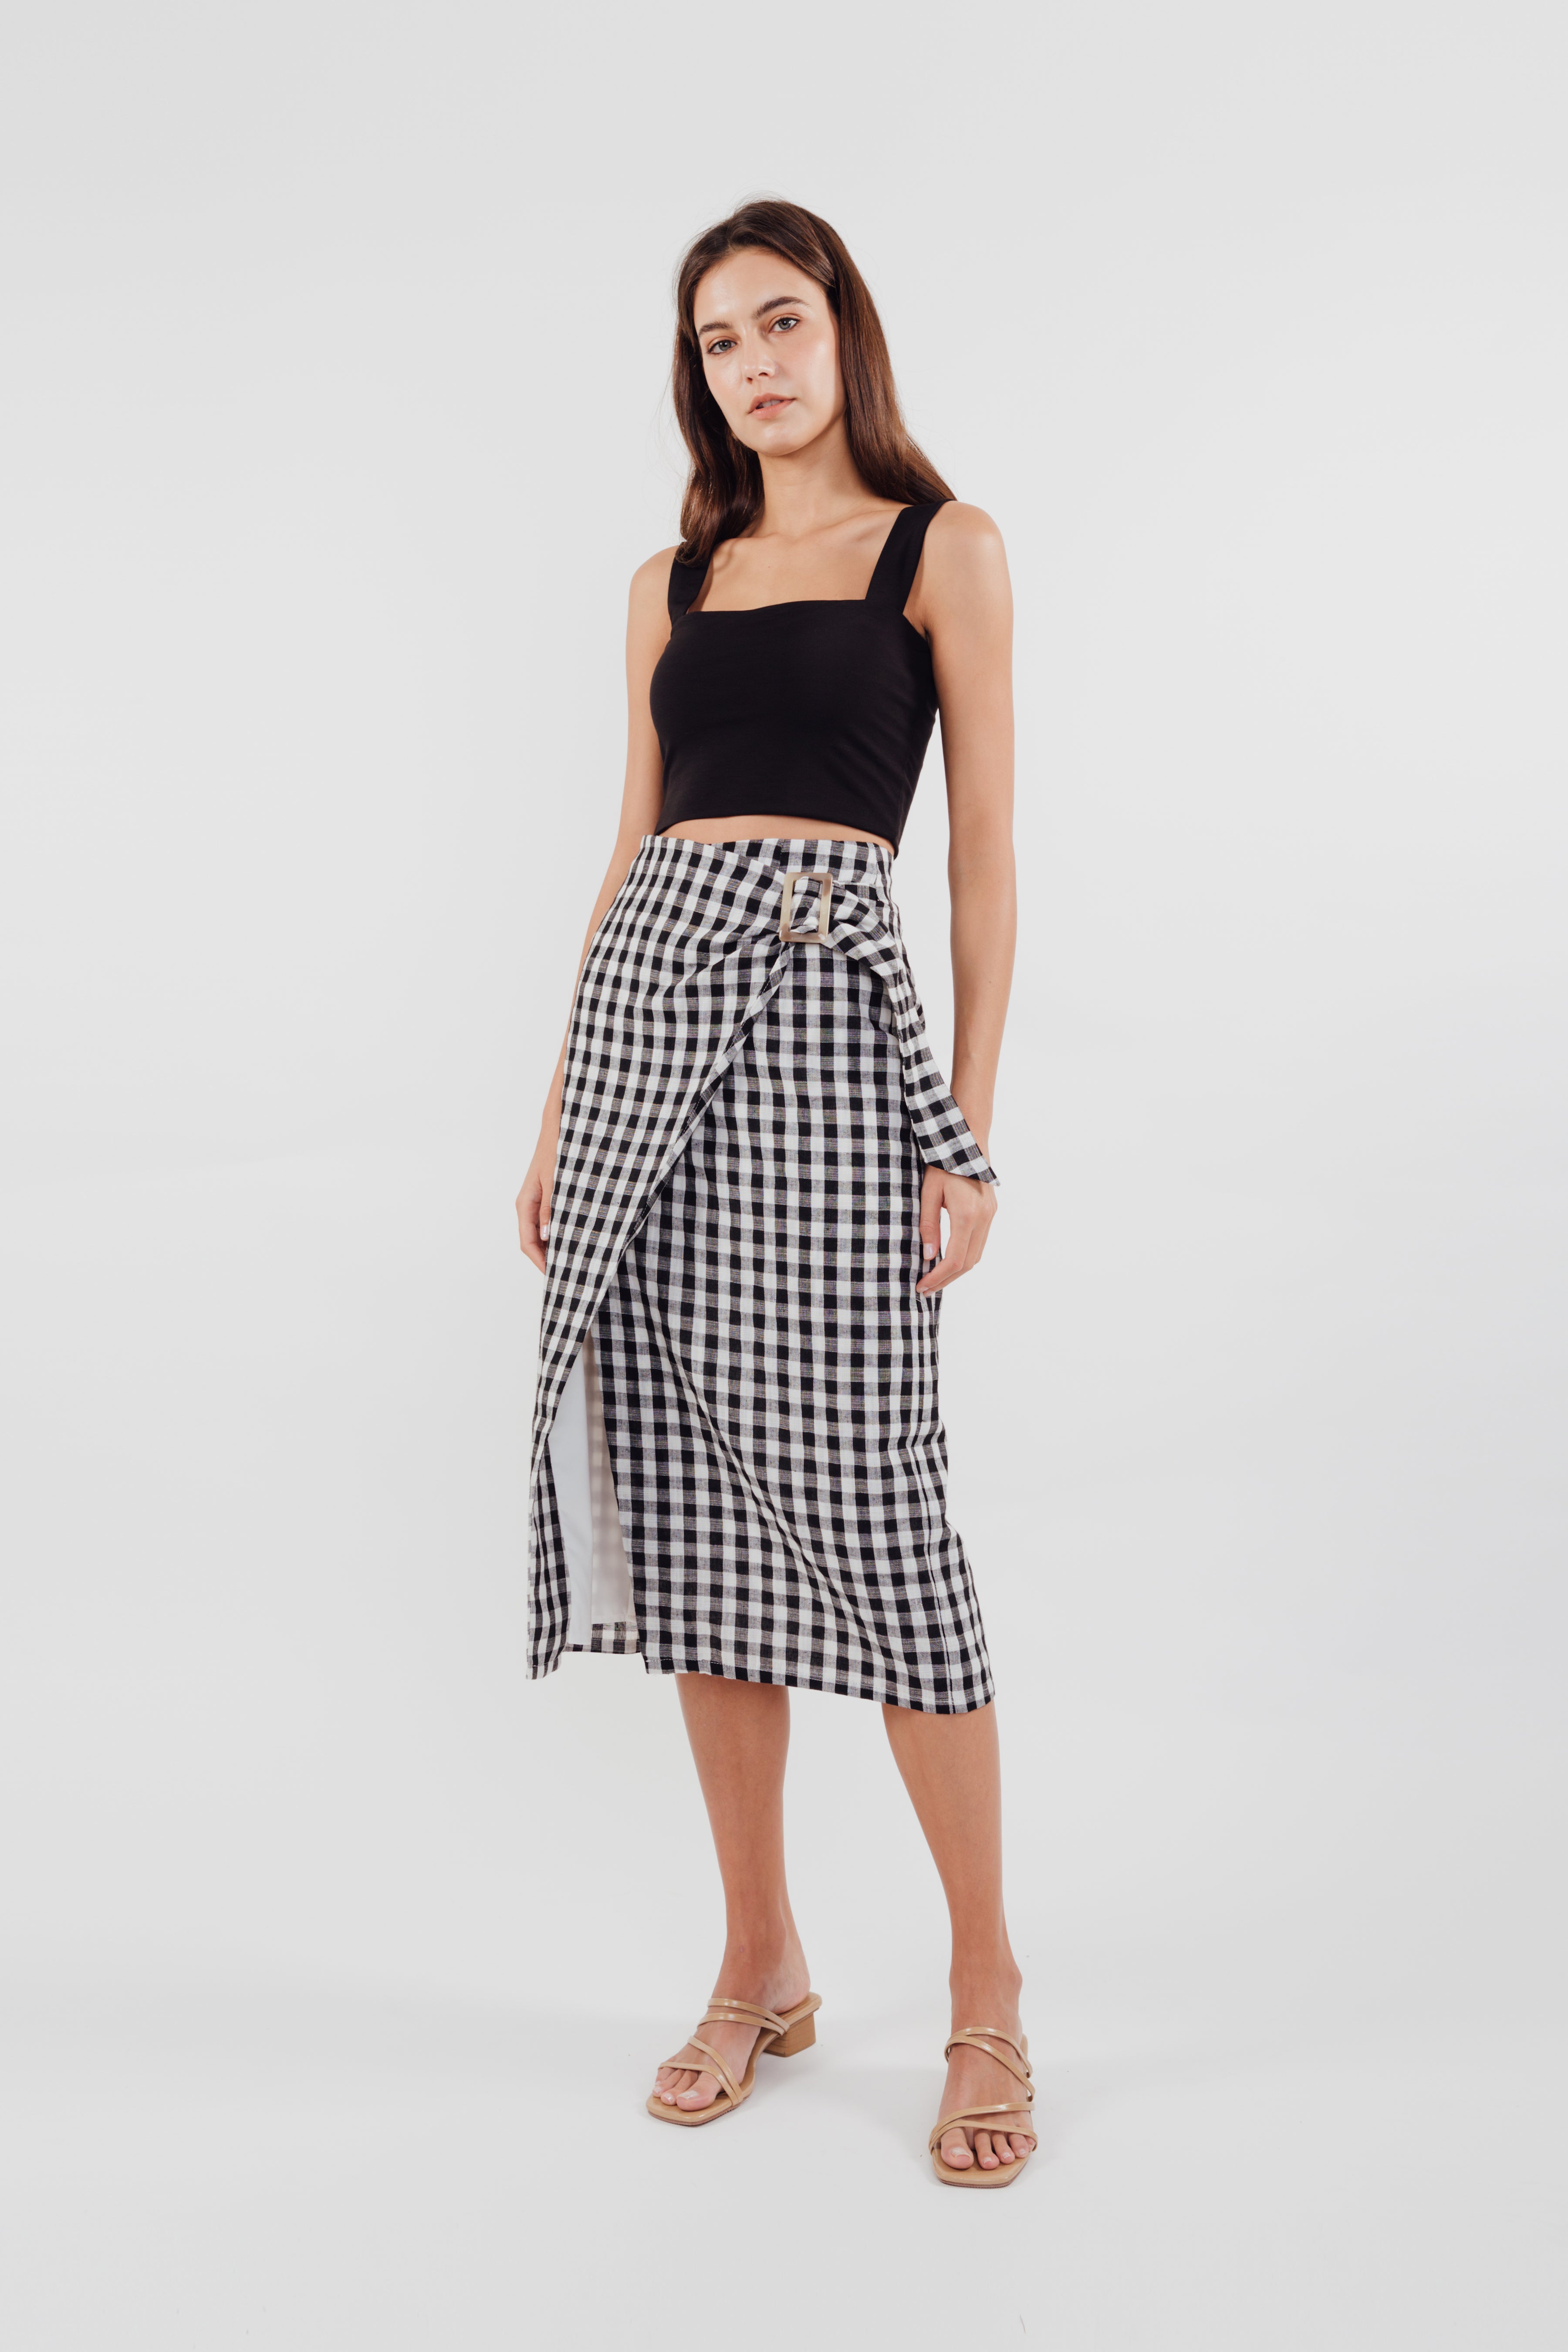 Wrap Skirt in Checkered Print